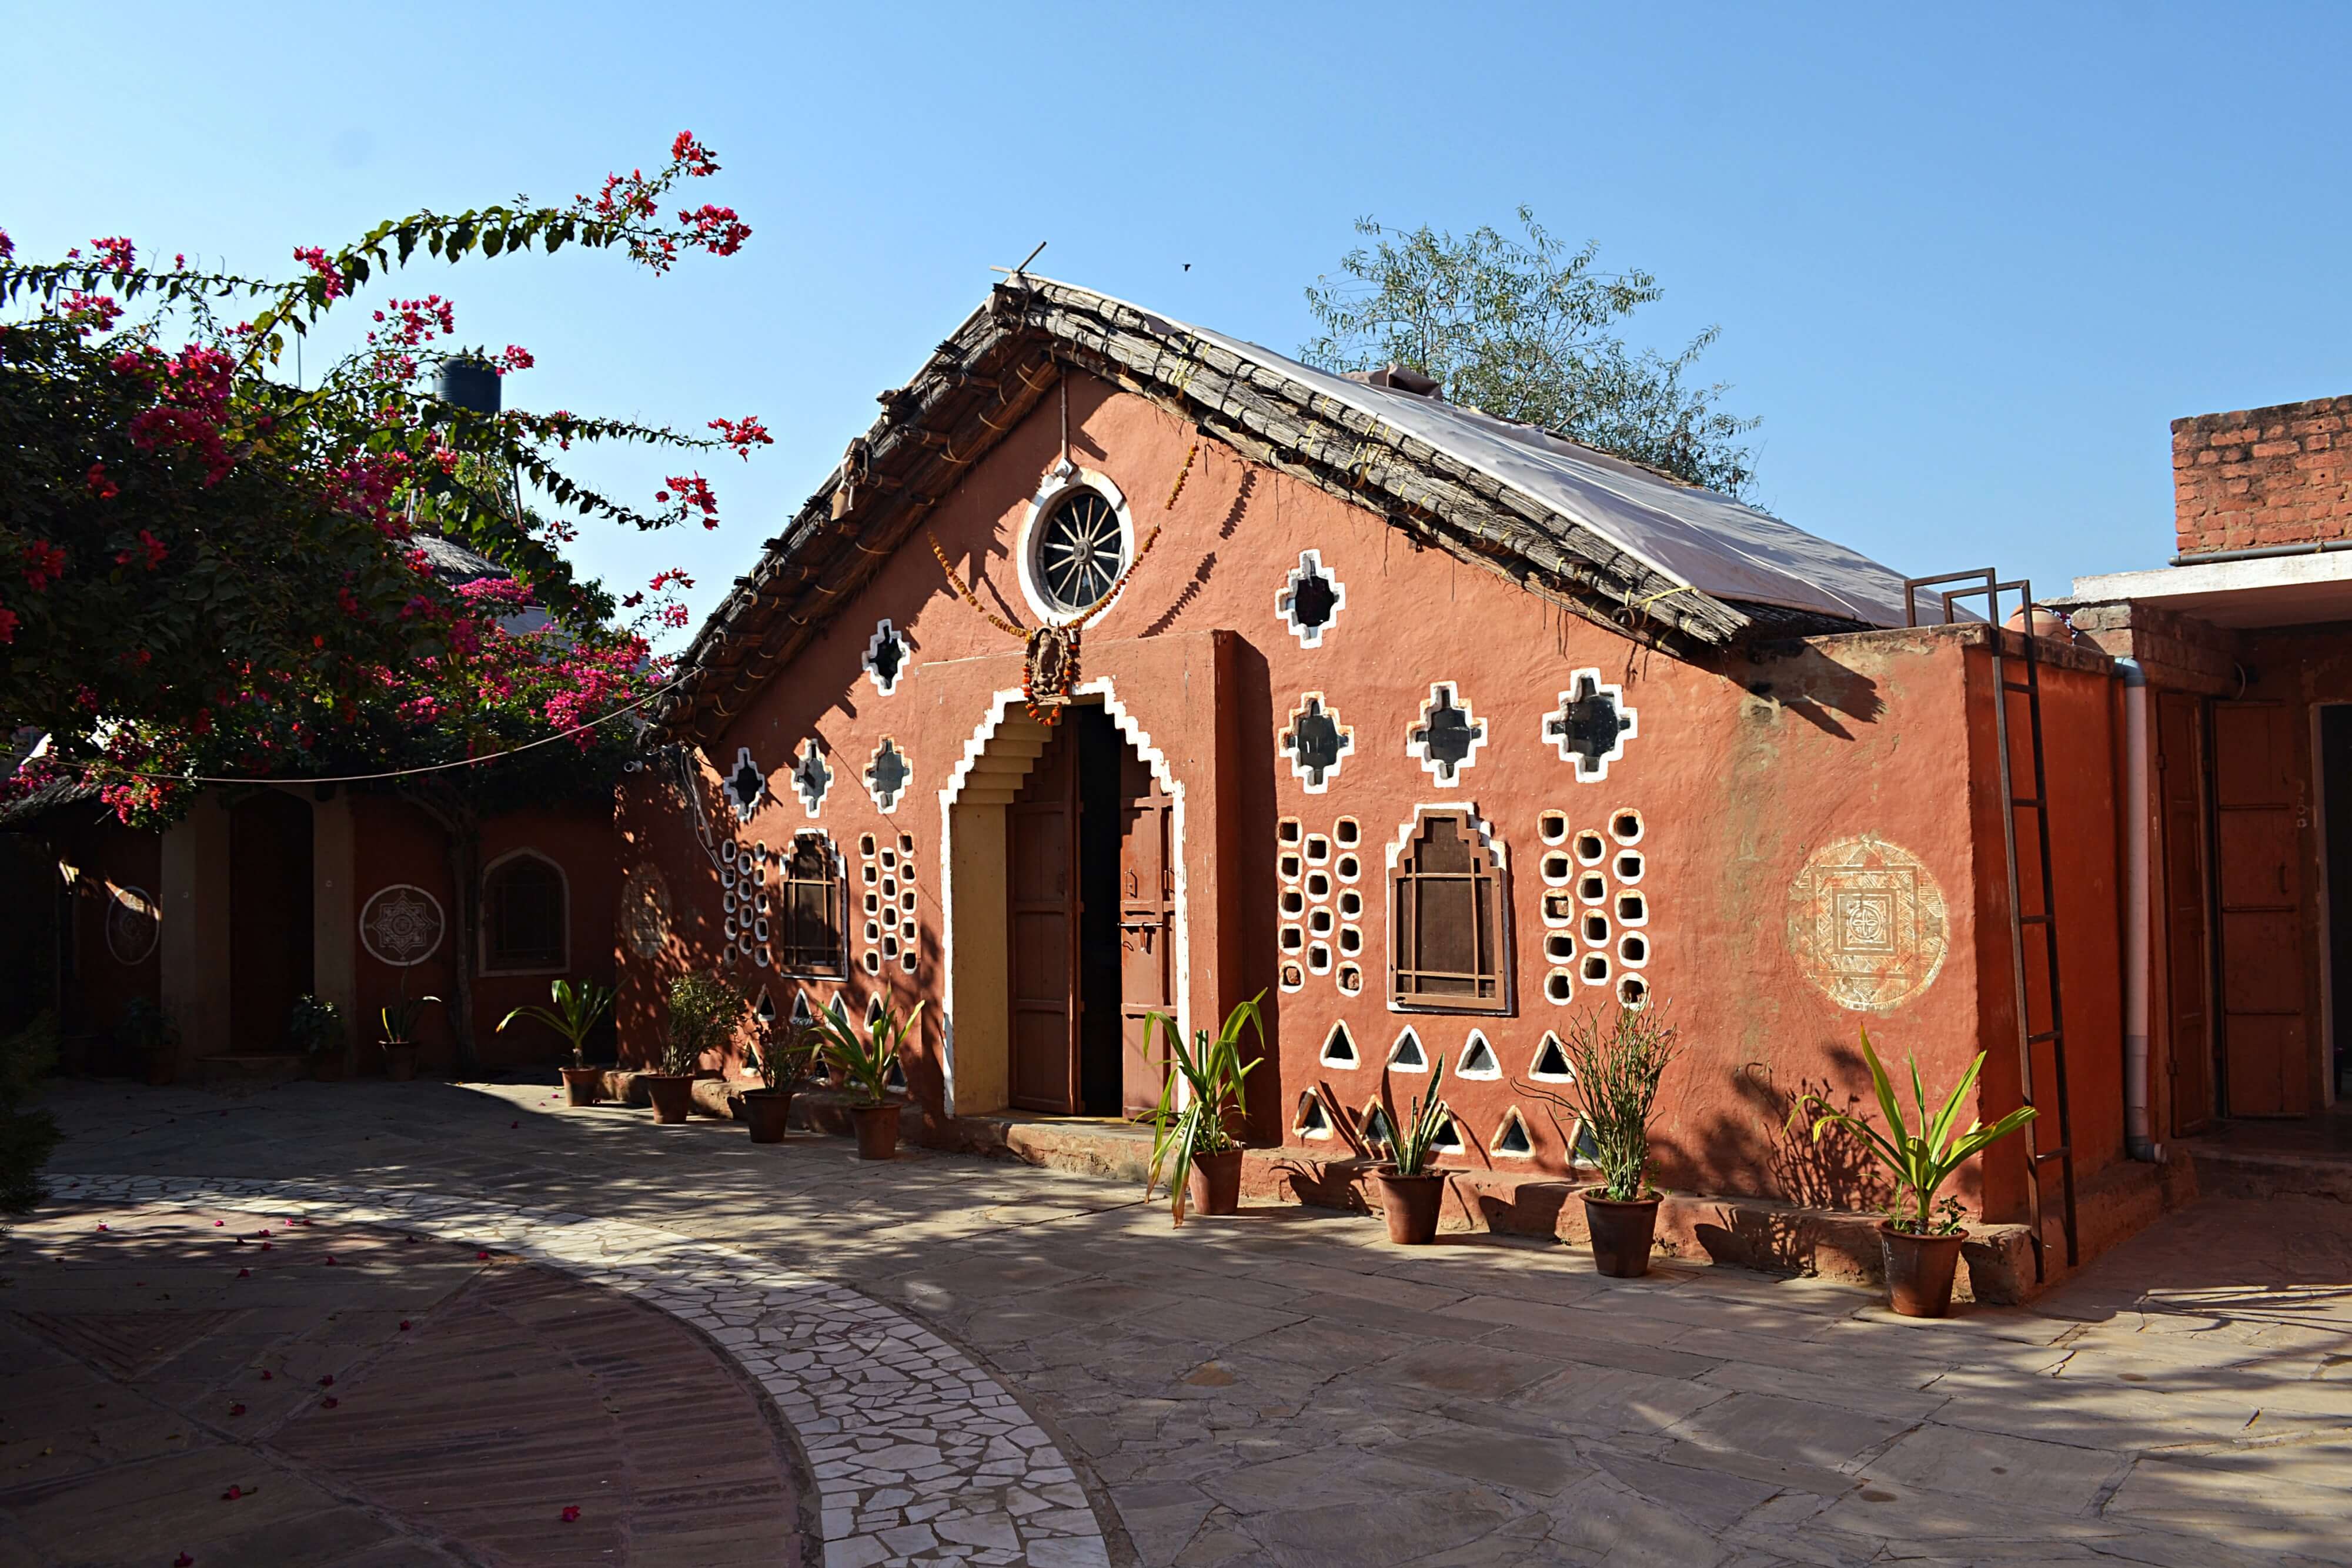 In the 1990s, responsible travel entrepreneur Ramesh Jangid bought a plot of land in Nawalgarh. The goal? To create a space that would see some of the benefits from the tourism boom flow to the local community. The result was Apani Dhani, a family-run eco-lodge committed to supporting local traditions, livelihoods and ecology.